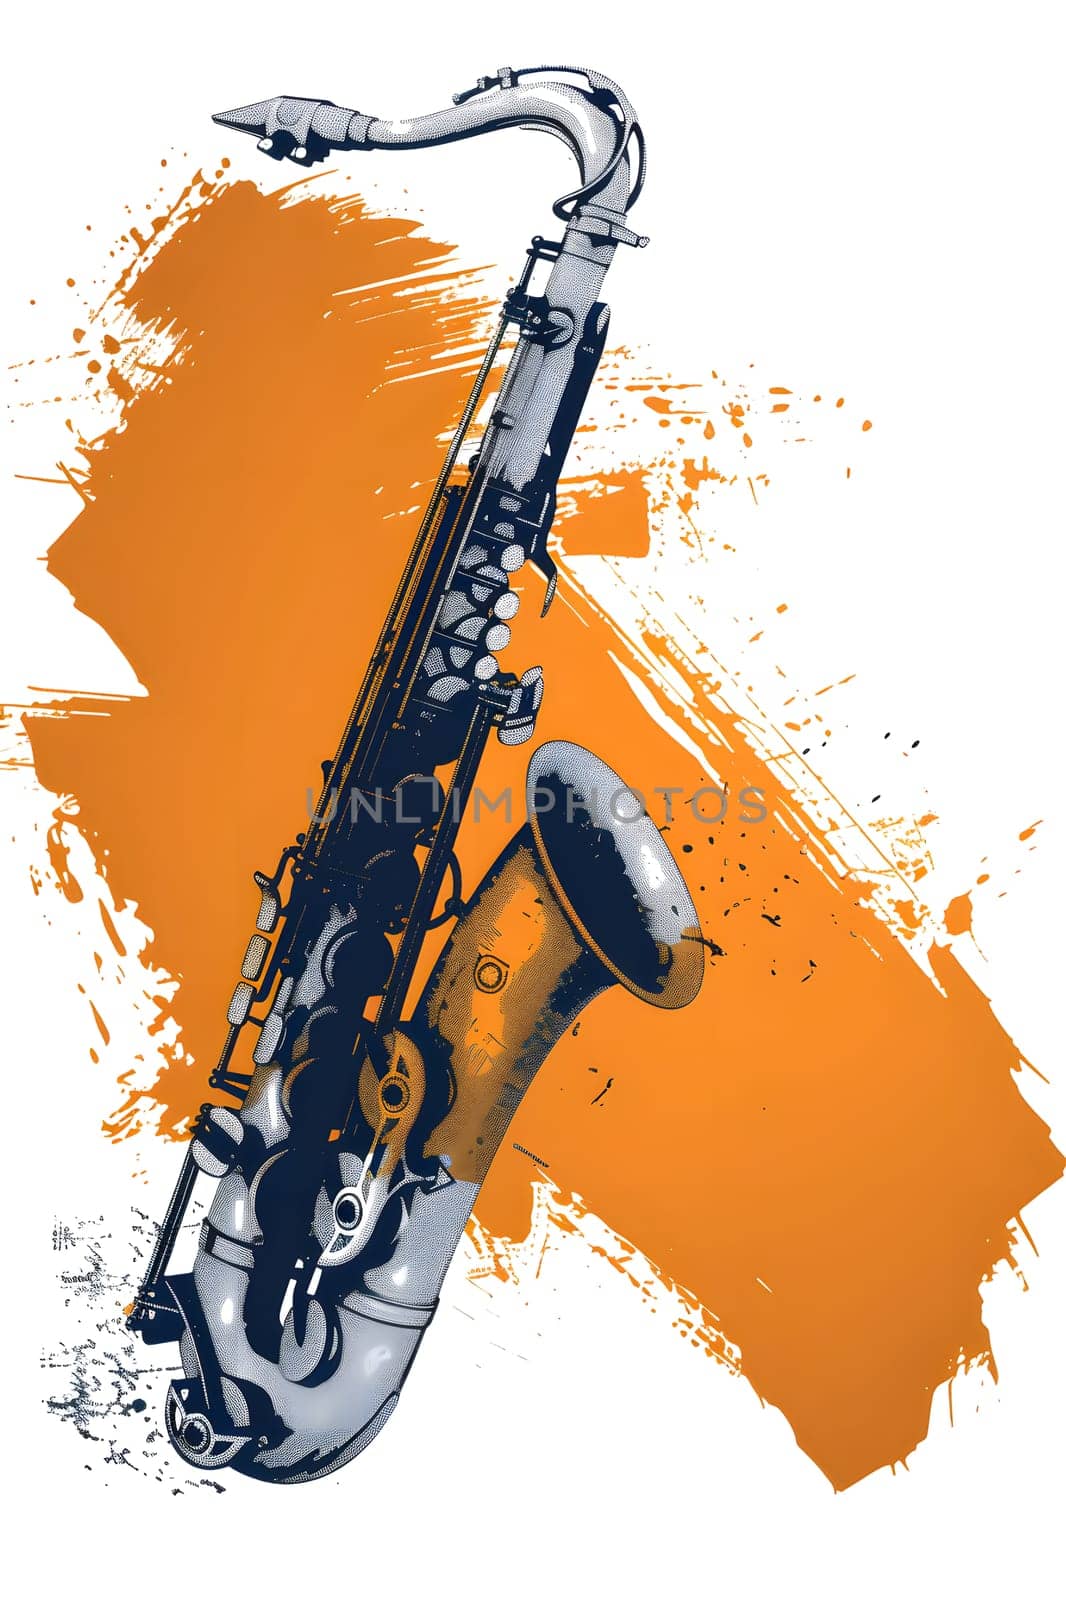 Fluid art style painting of a saxophone on orange background by Nadtochiy